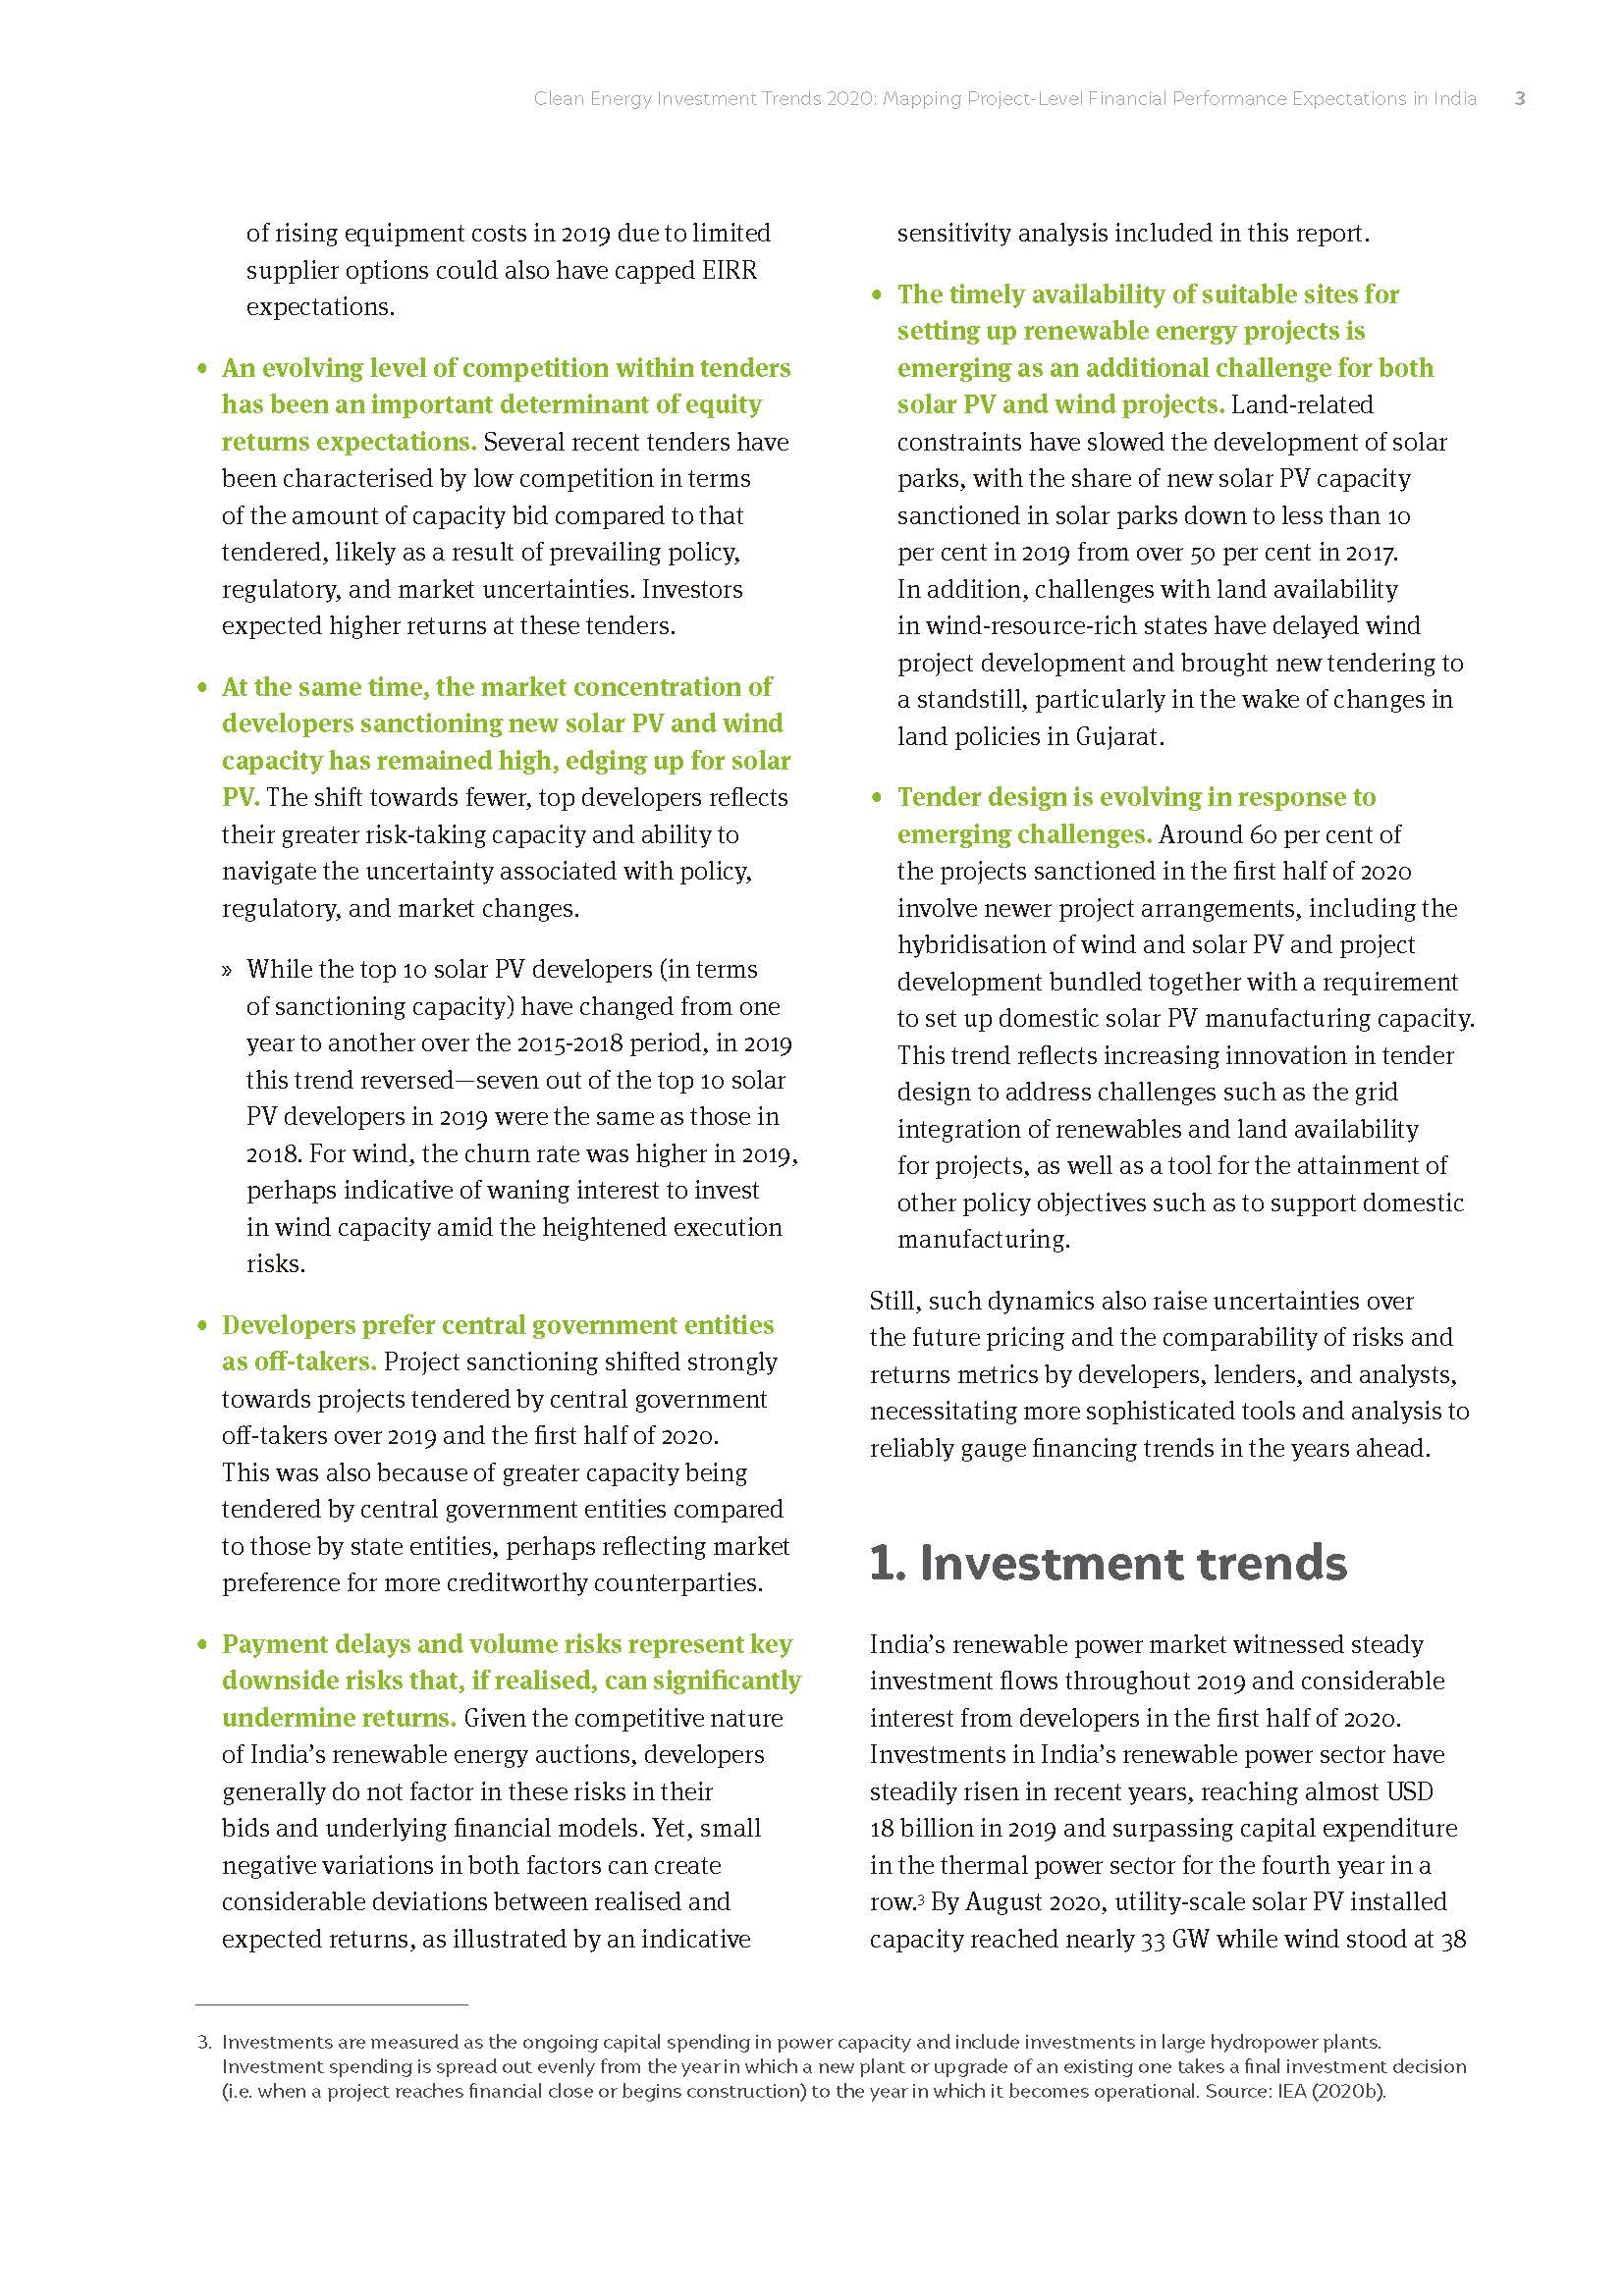 Clean Energy Investment Trends 2020_页面_13.jpg